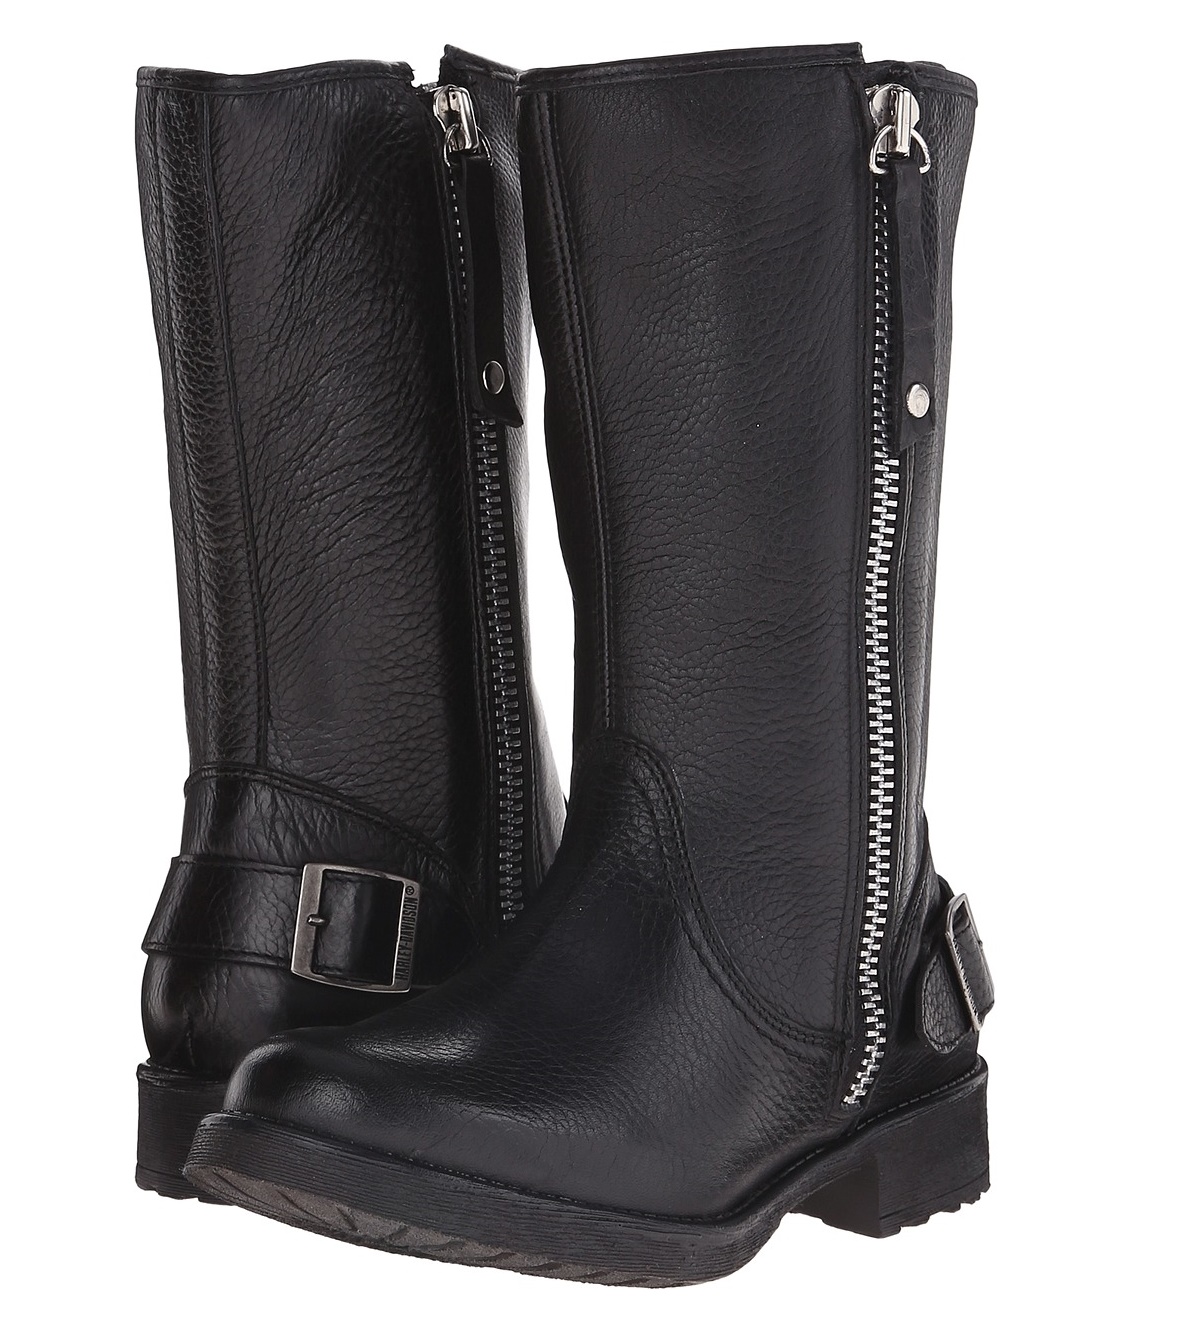 Shoe of the Day | Harley-Davidson Footwear Baisley Boots | SHOEOGRAPHY